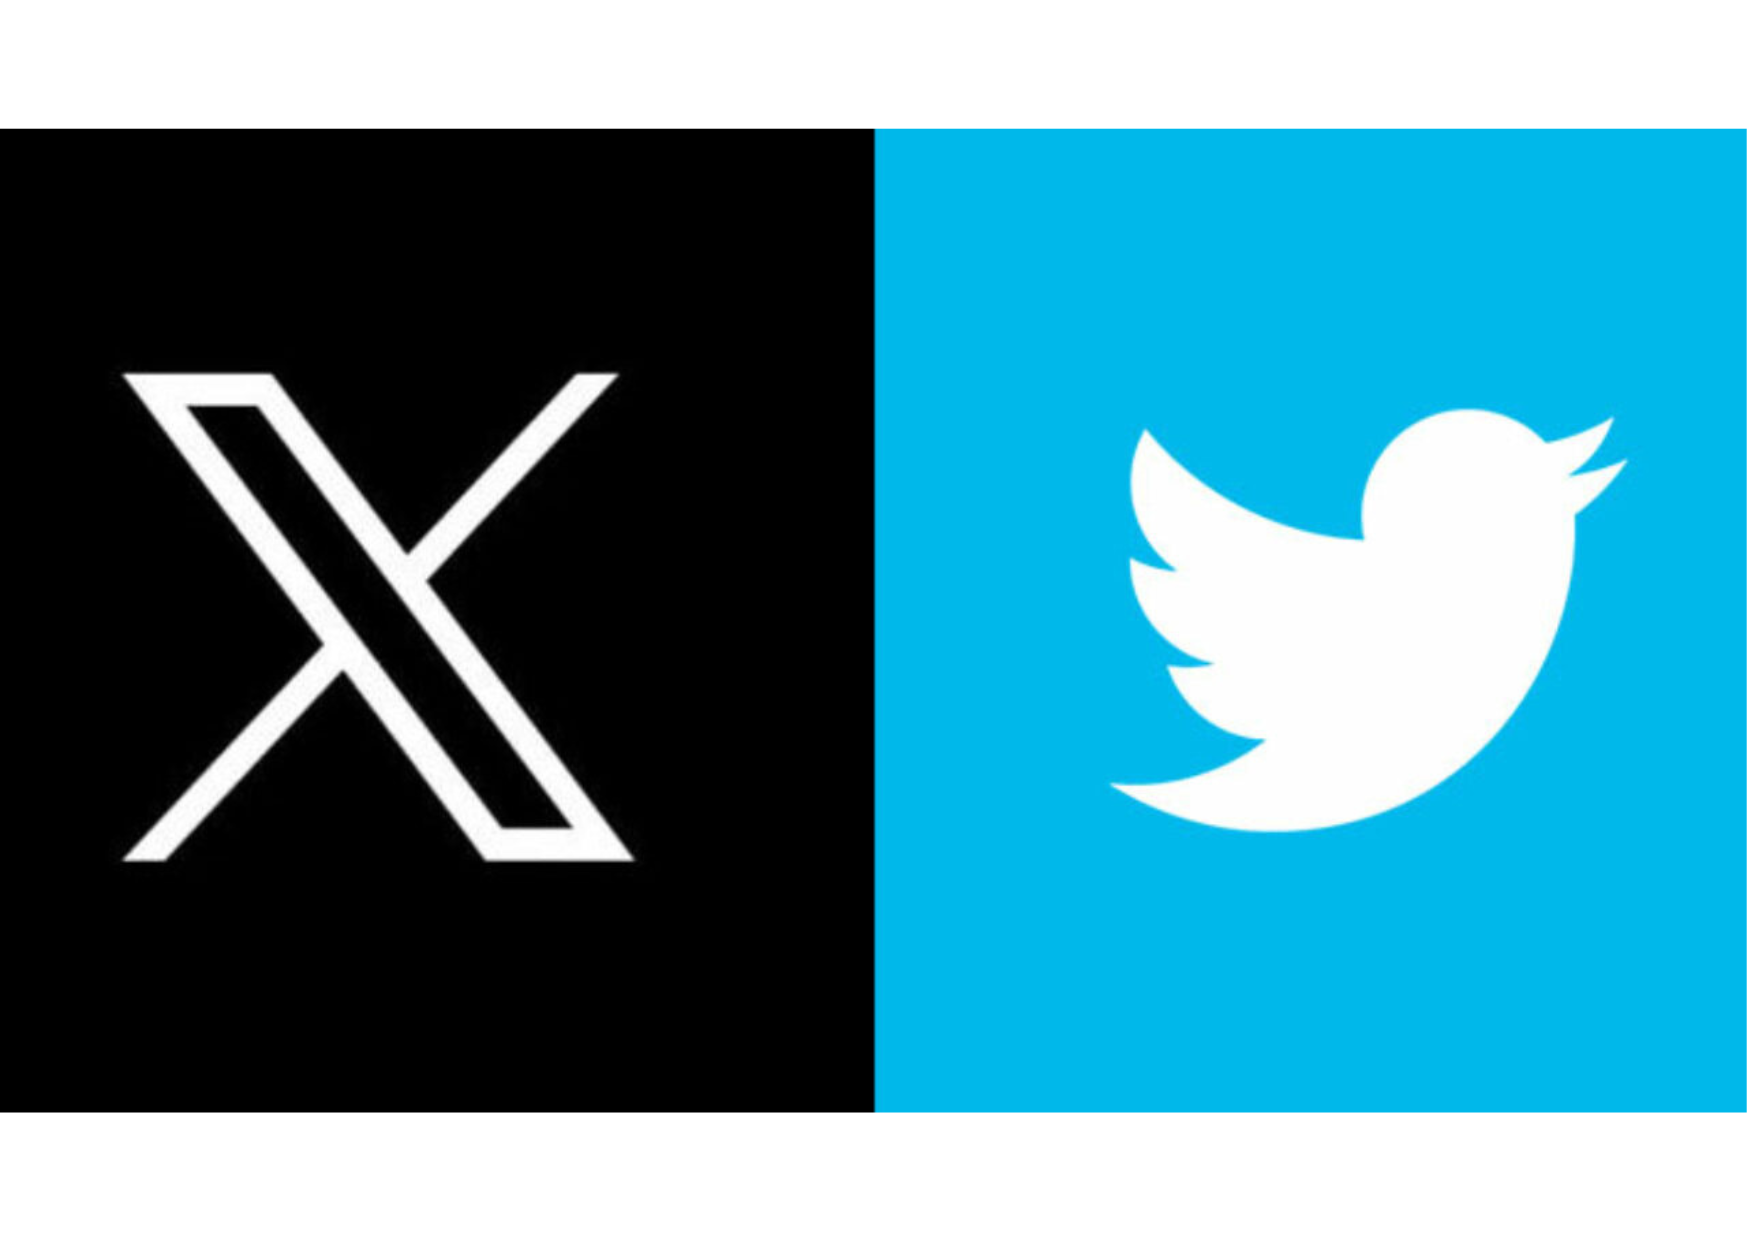 Did you know that we're also on X (formerly Twitter)?